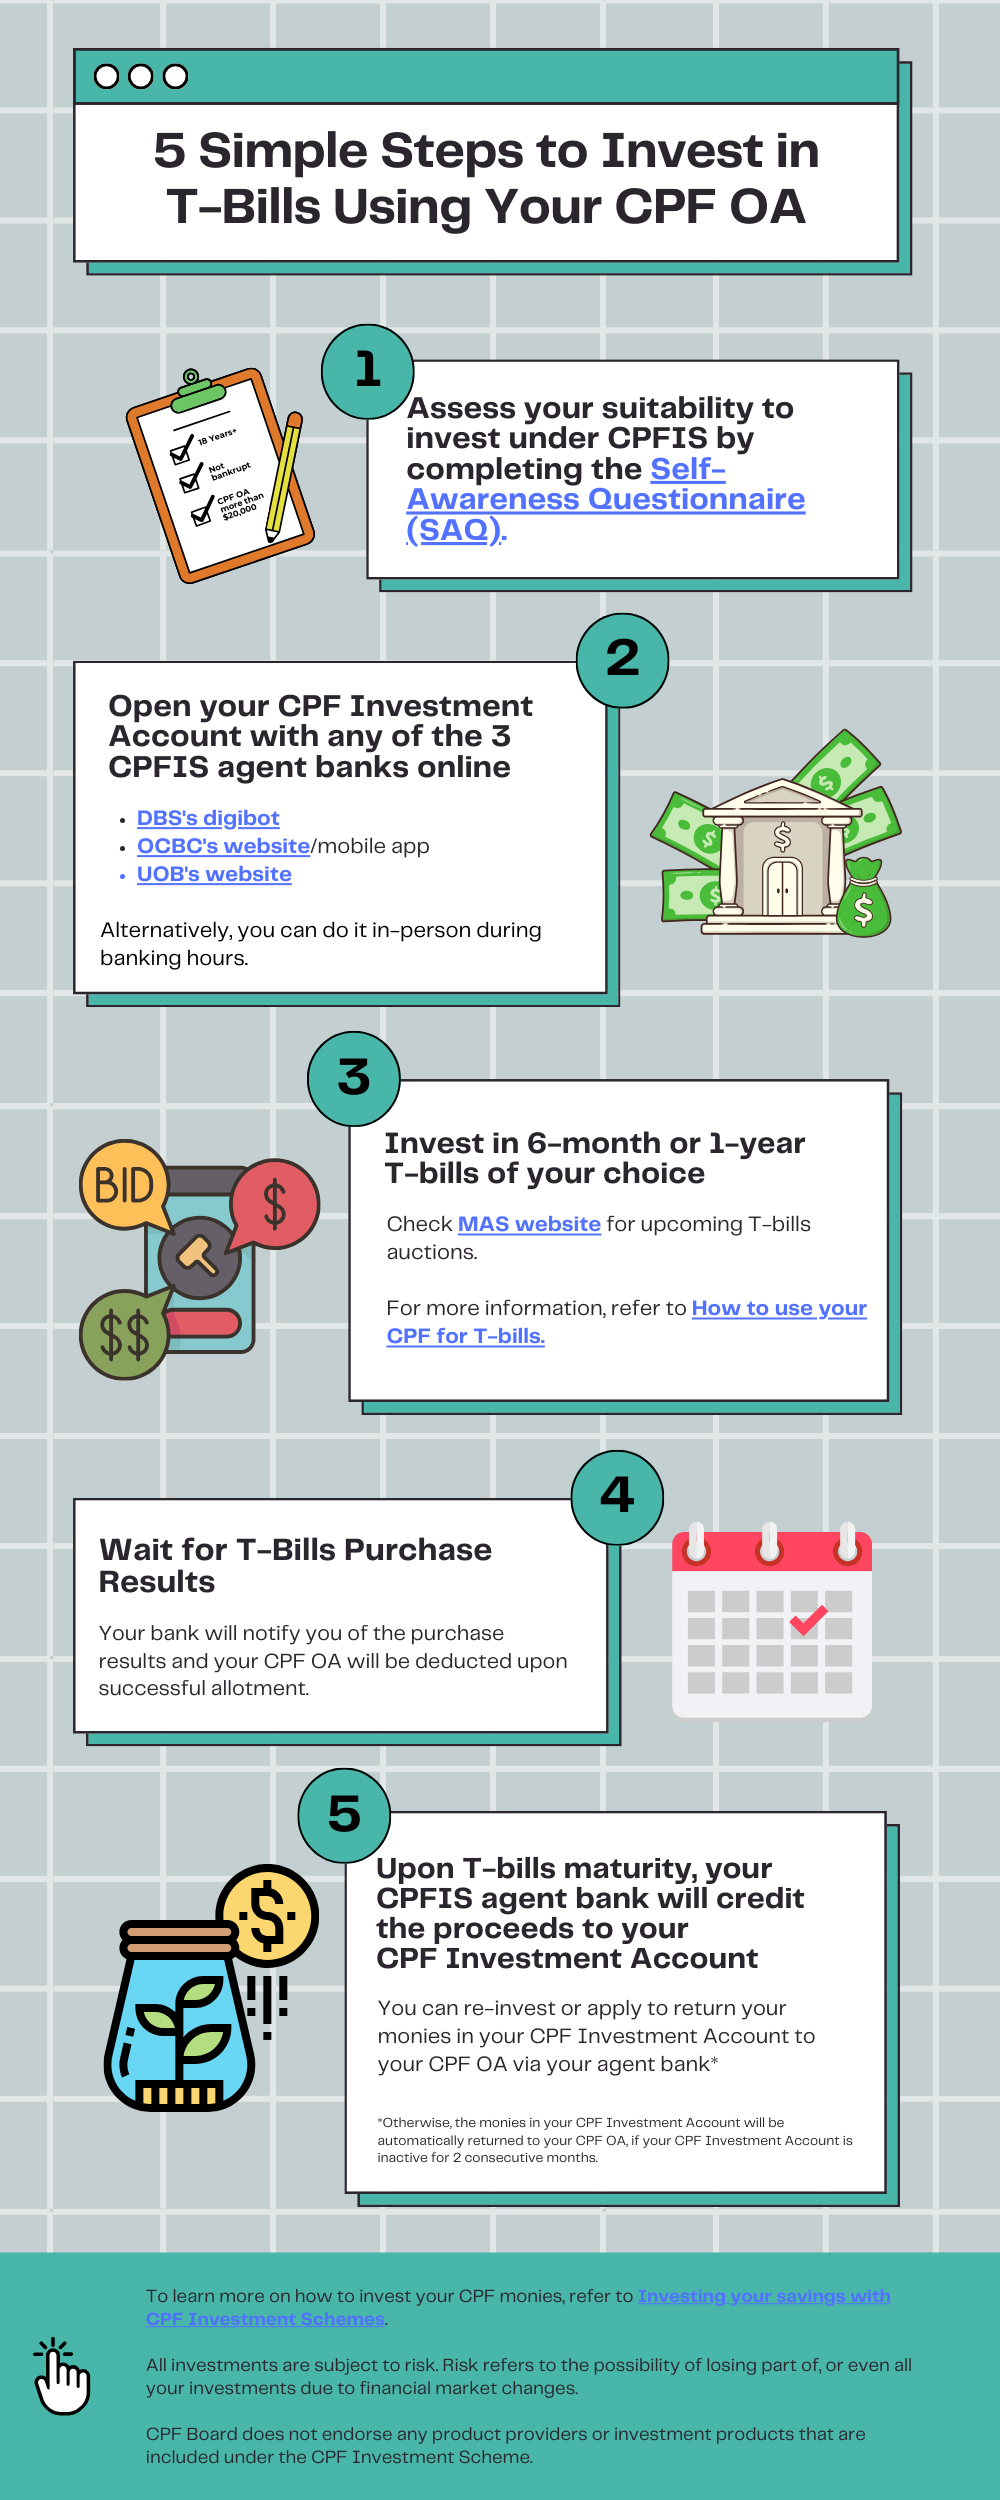 Five simple steps to invest in Treasury Bills using your CPF Ordinary Account